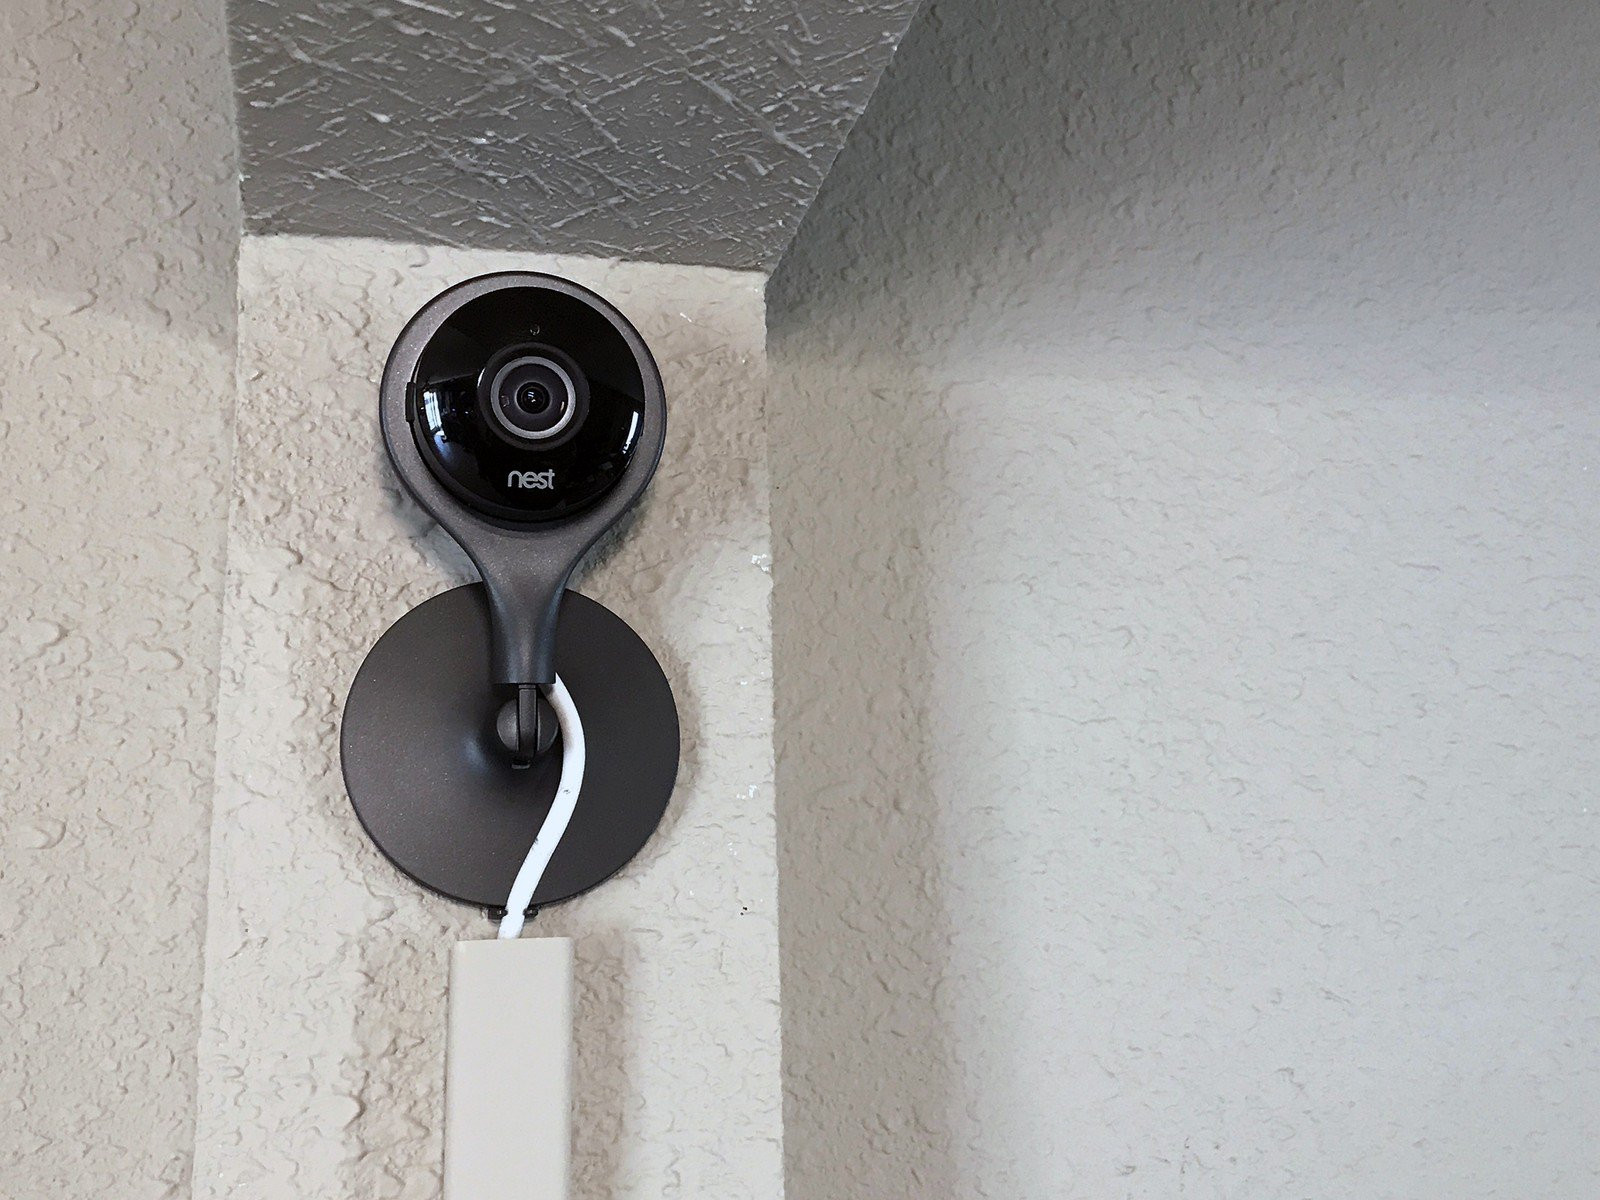 DIY Home Security Camera
 What to consider when building a DIY home security system